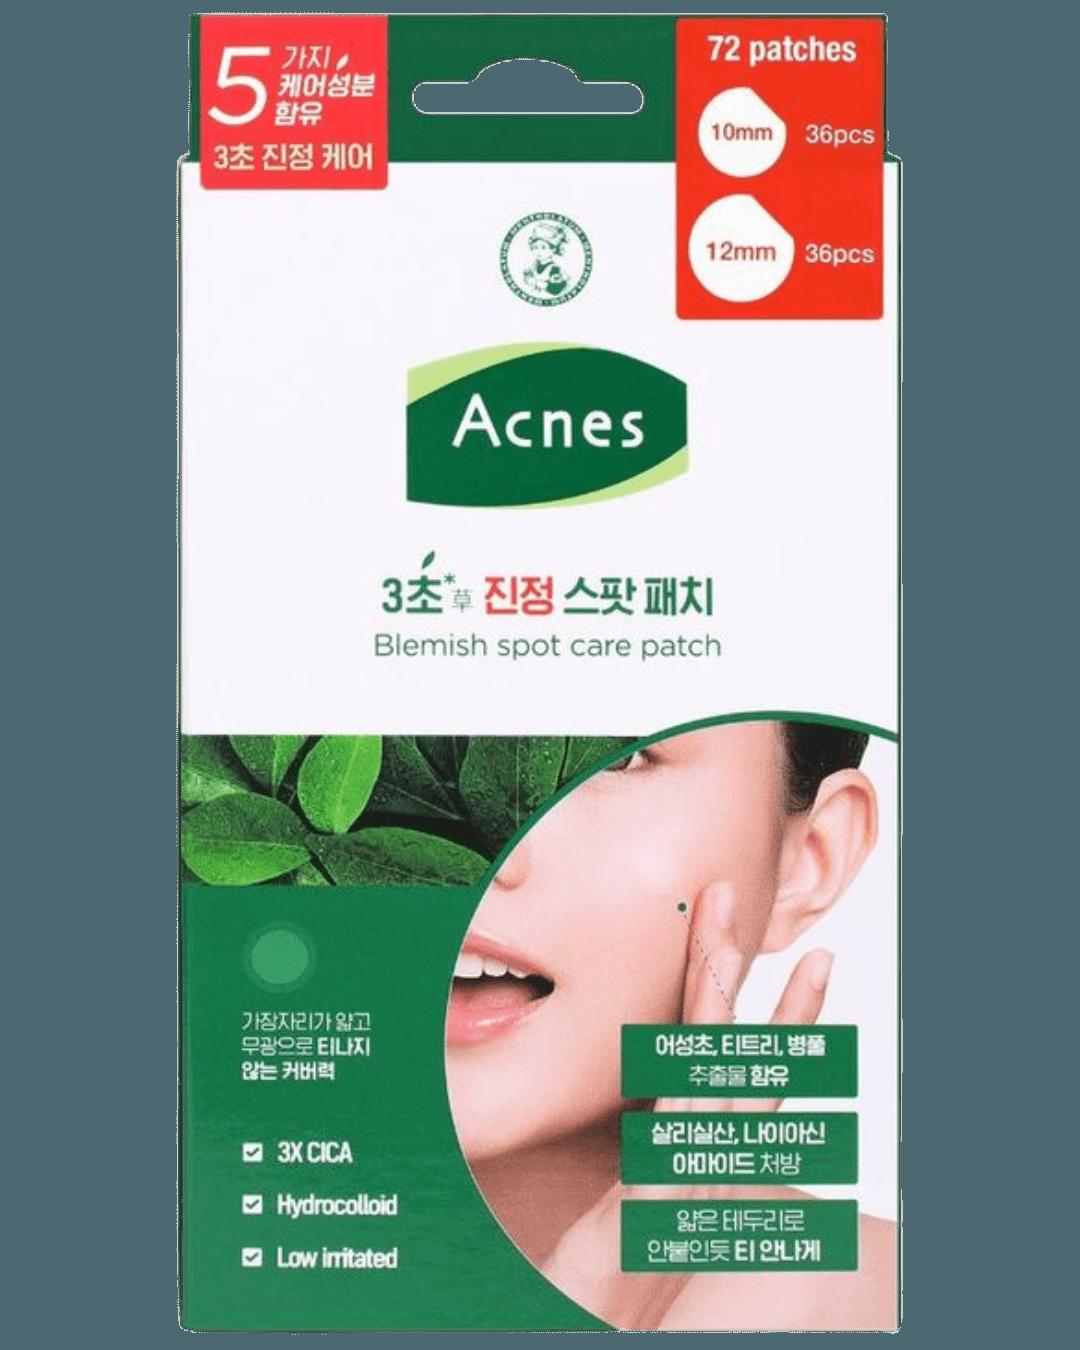 Daily Vanity Beauty Awards 2024 Best Skincare Acnes Blemish Spot Care Patch 72s Voted By Beauty Experts